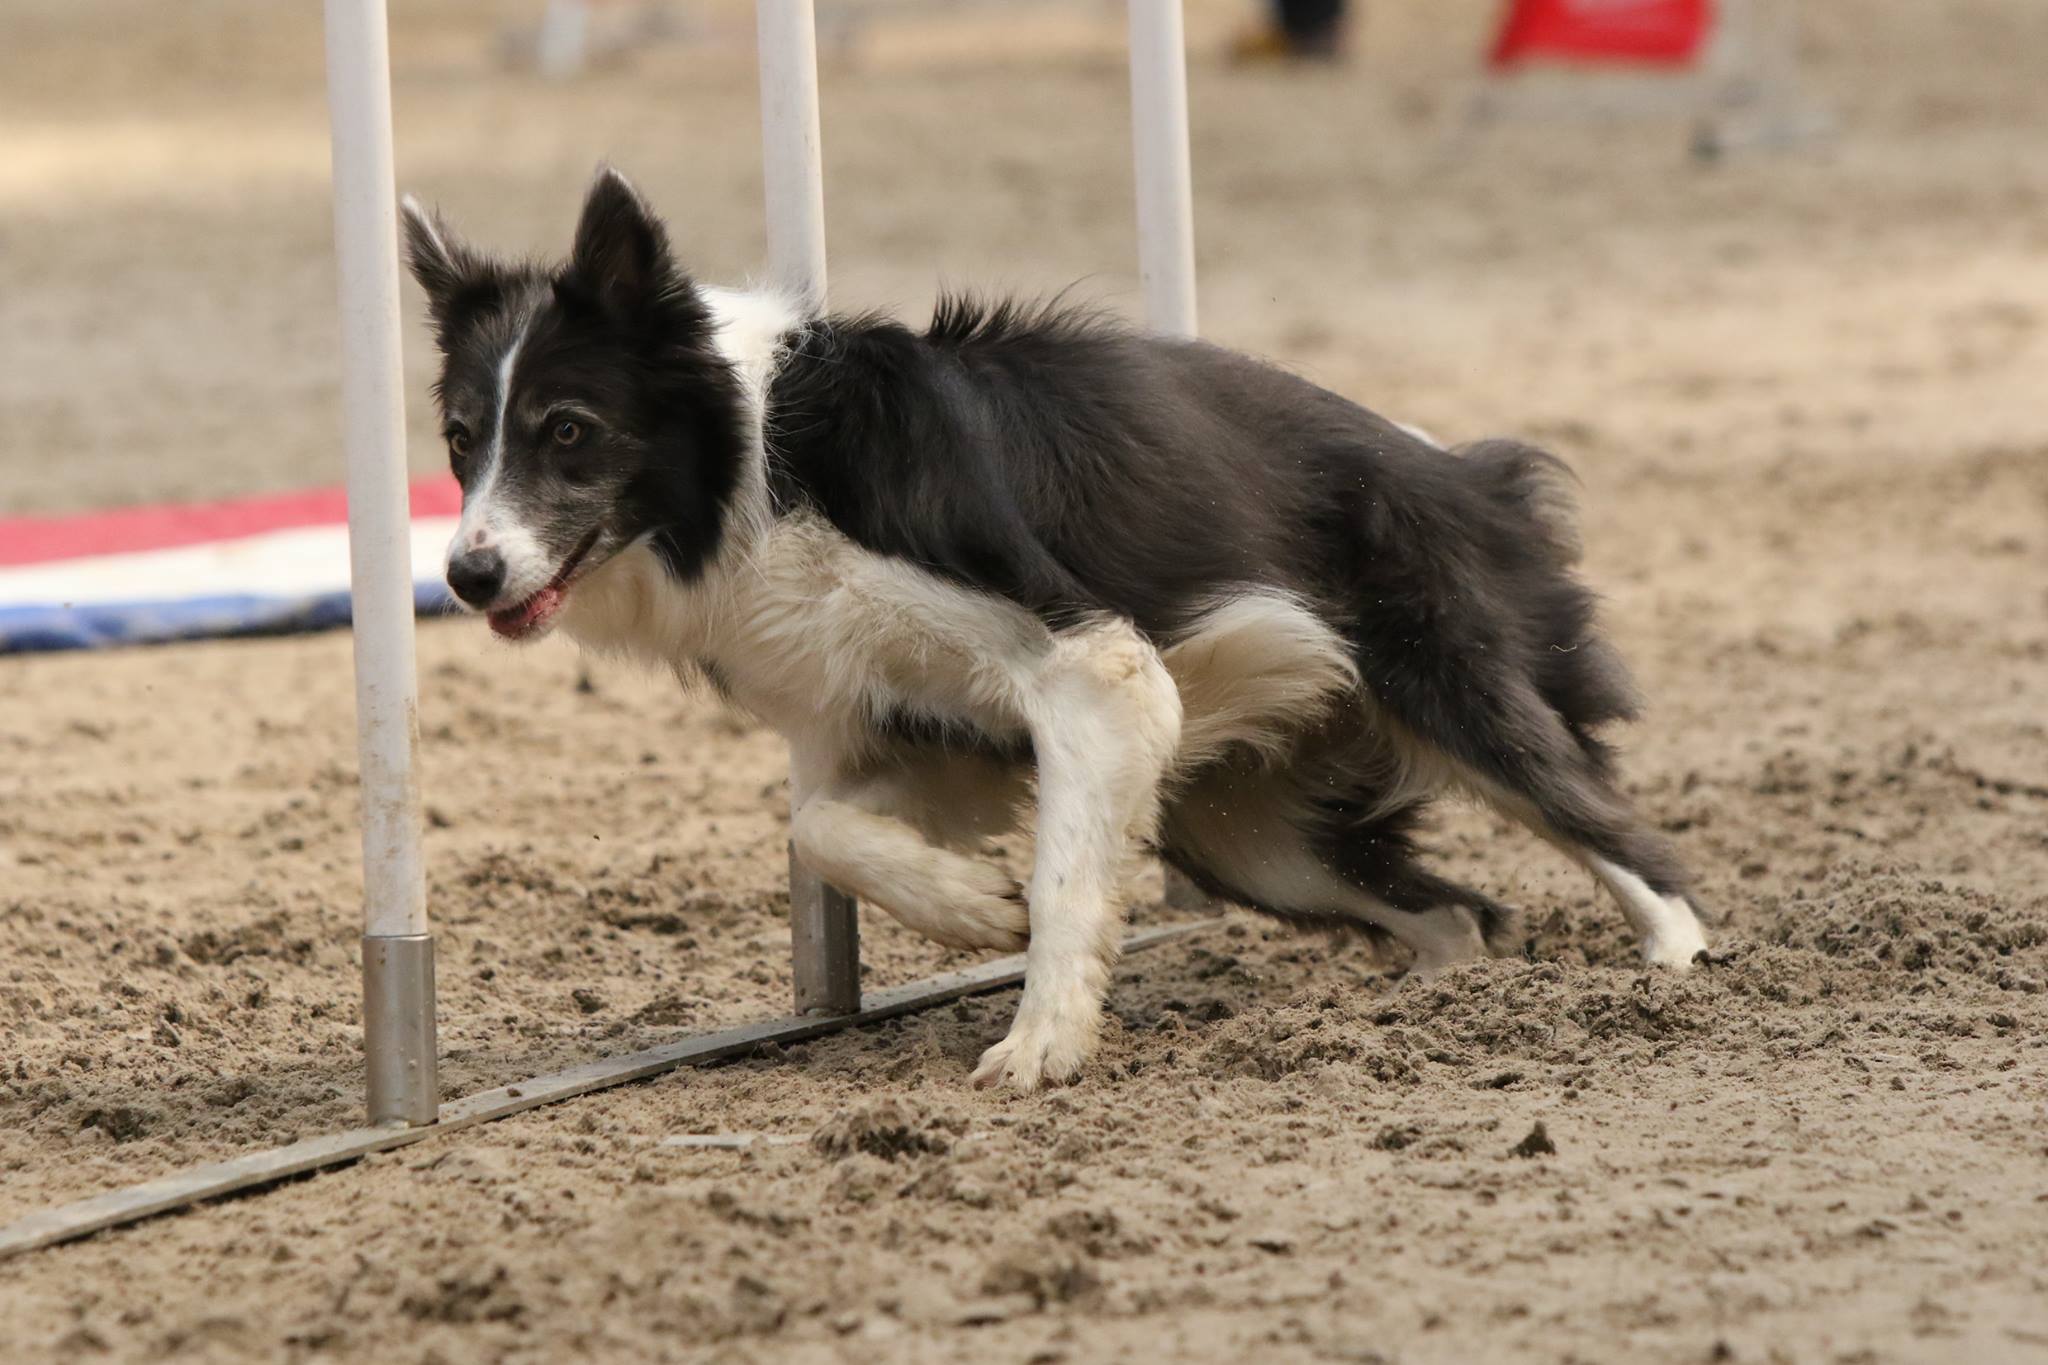   Agili-junkie    (noun)   A person who is obsessed and/or addicted to watching and/or doing dog agility. 